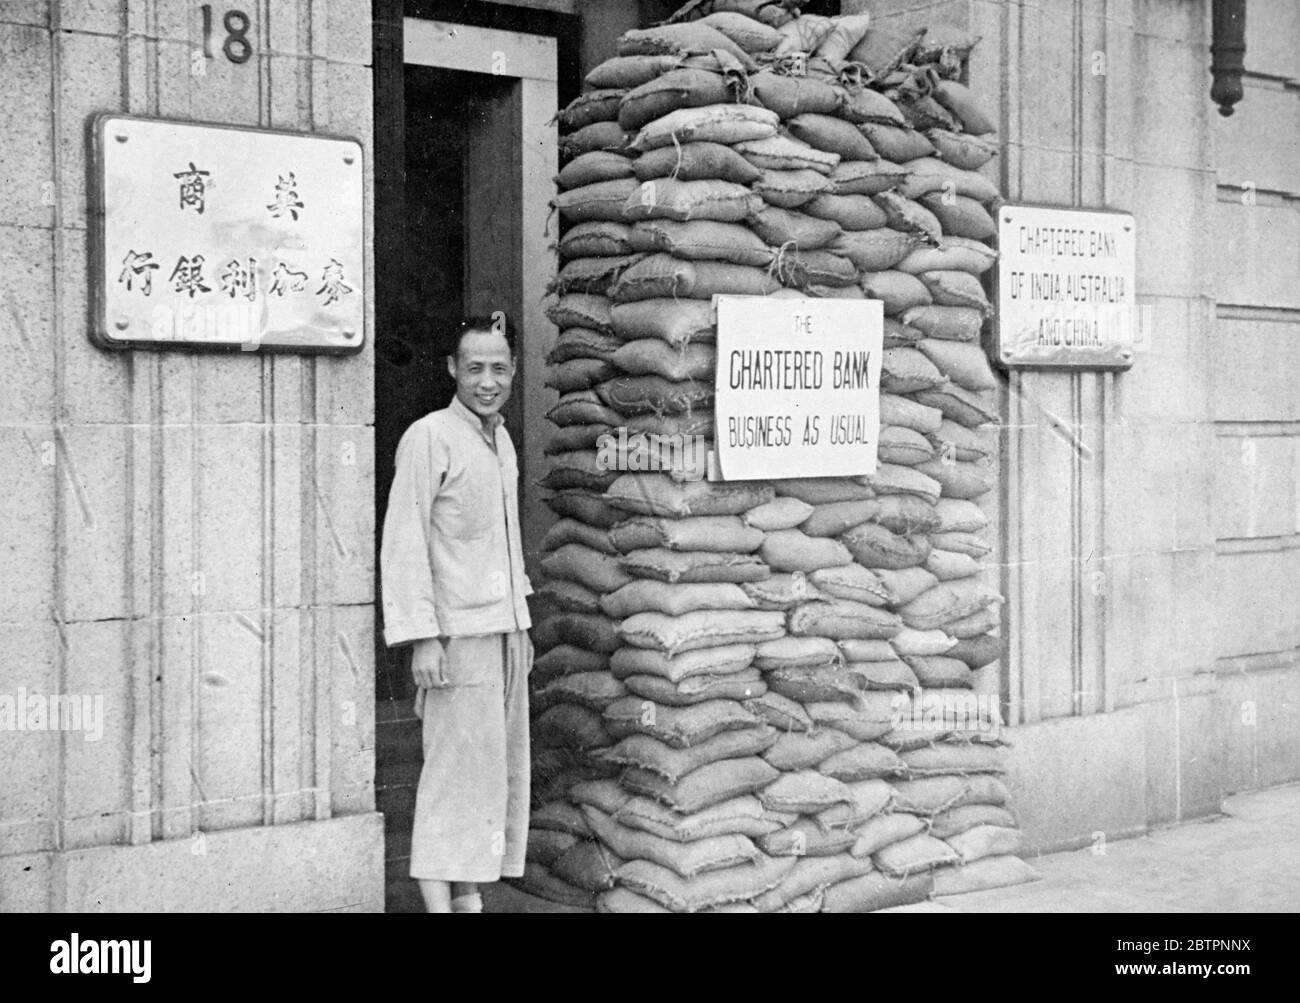 Banking with sandbags. Business as usual in Shanghai. Though Shanghai's trade has been almost ruined by the disastrous Sino- Japanese war, some businesses housed along the Bund (waterfront) have sandbagged windows and doorways as protection against flying shrapnel and bullets and are endeavouring to carry on as usual. The buildings on the Bund , not only in danger by fire from Japanese warships in the Whangpoo river, but also by Chinese firing from Pootung, across the river. Photo shows, the sandbagged doorway of a bank on the Bund at Shanghai, with a business as usual notic on display. 27 Sep Stock Photo